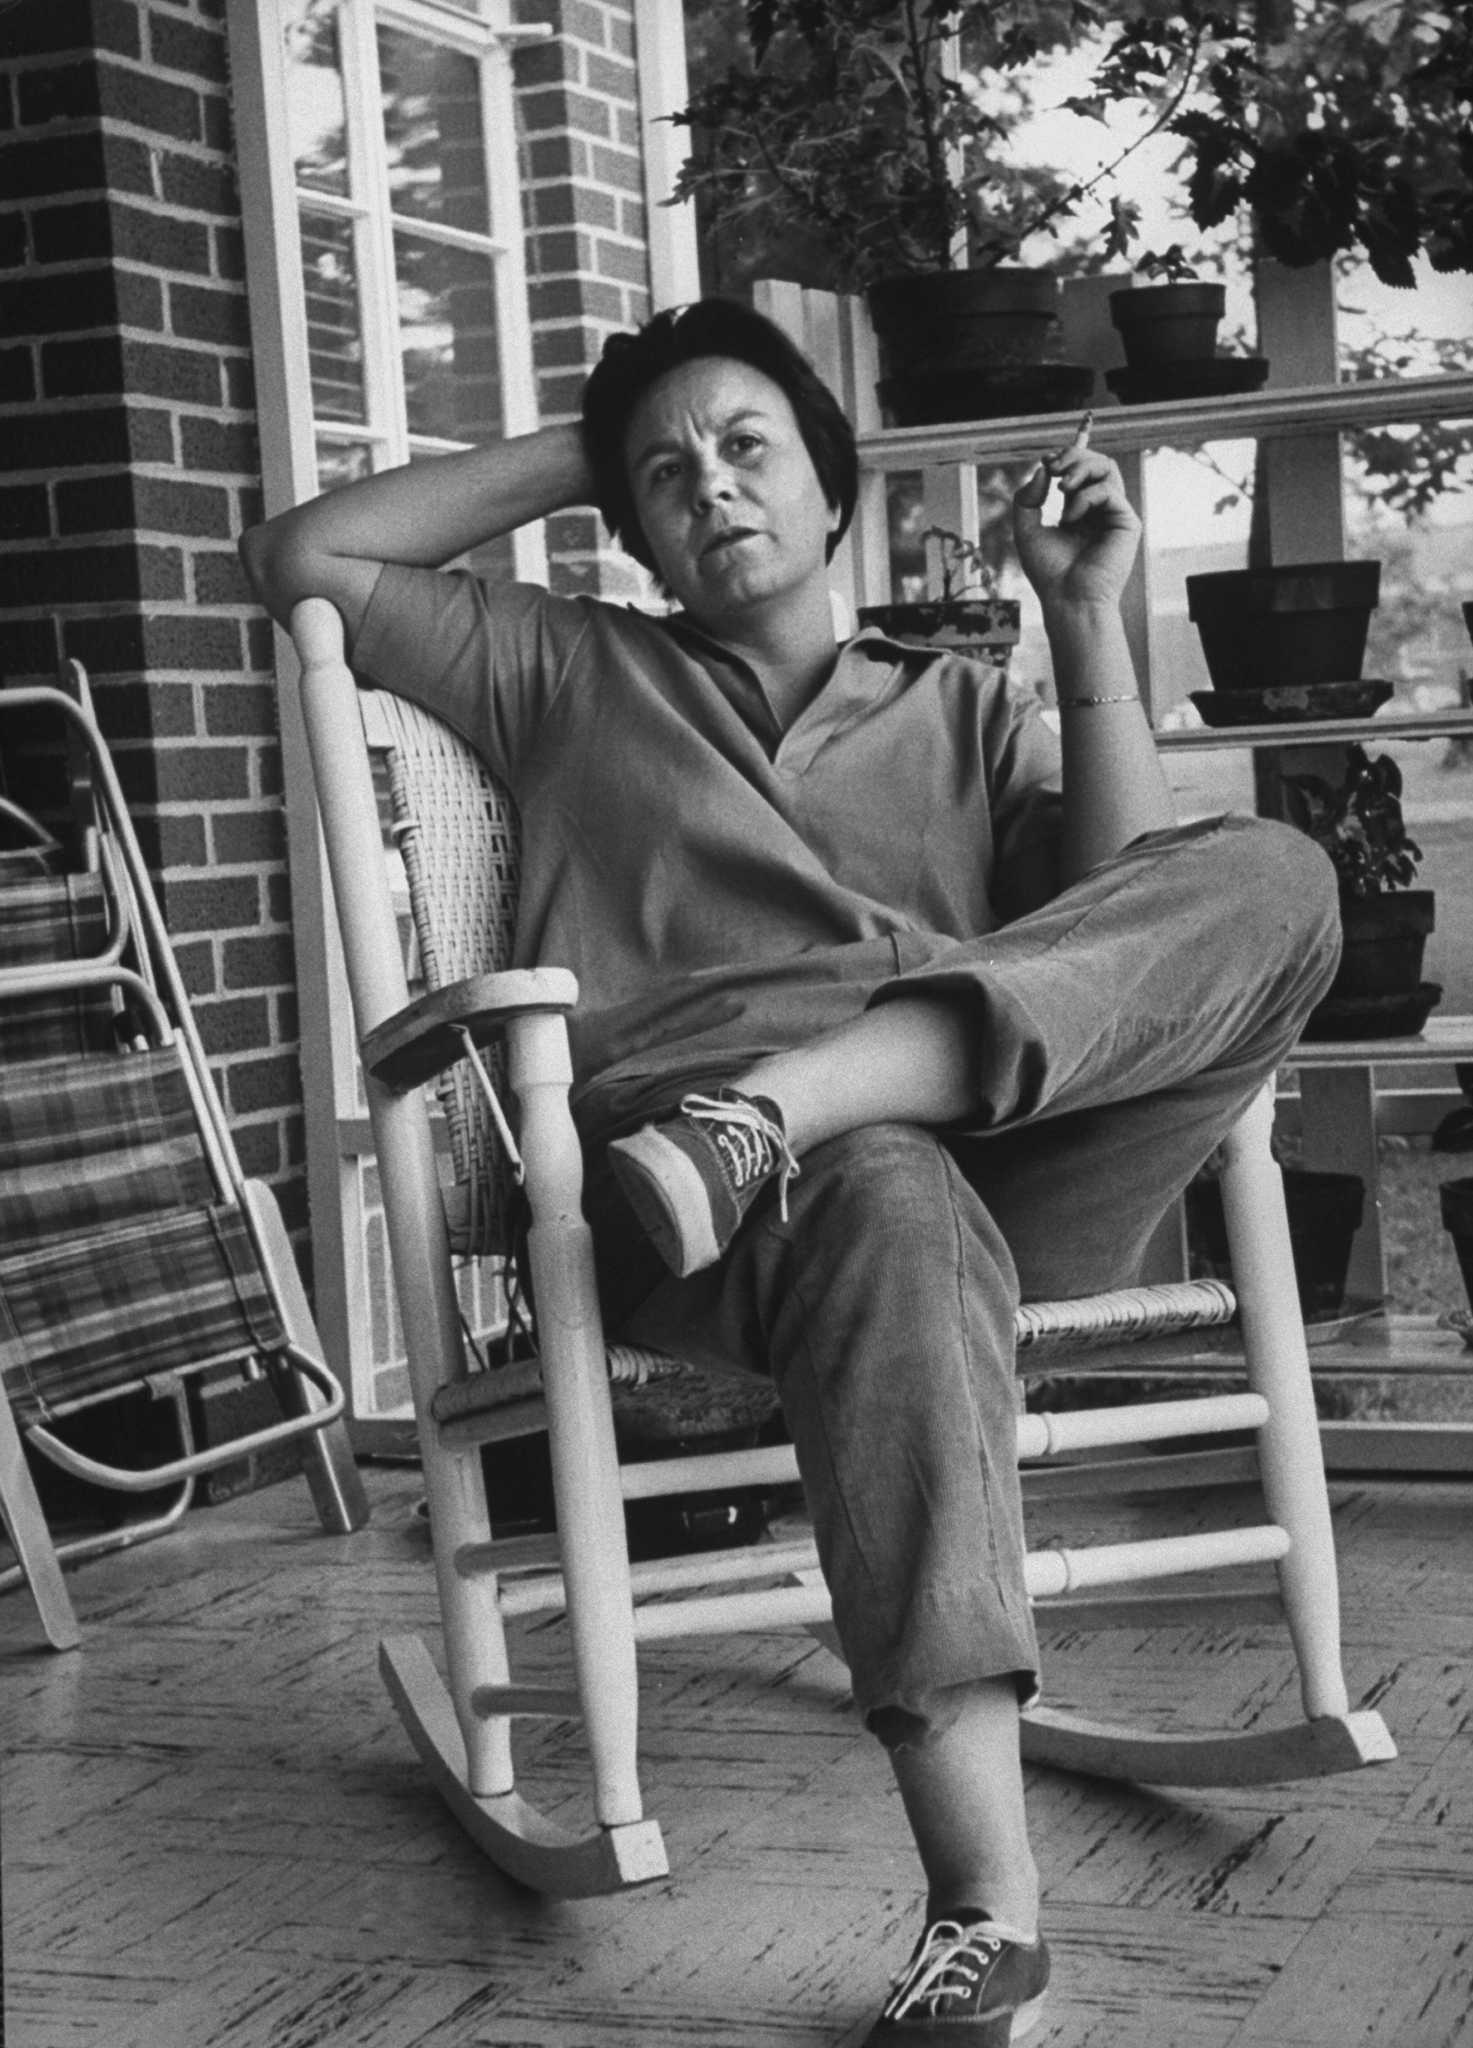 PHOTO: Author of "To Kill a Mockingbird," Harper Lee, is pictured while visiting her home town in 1961.